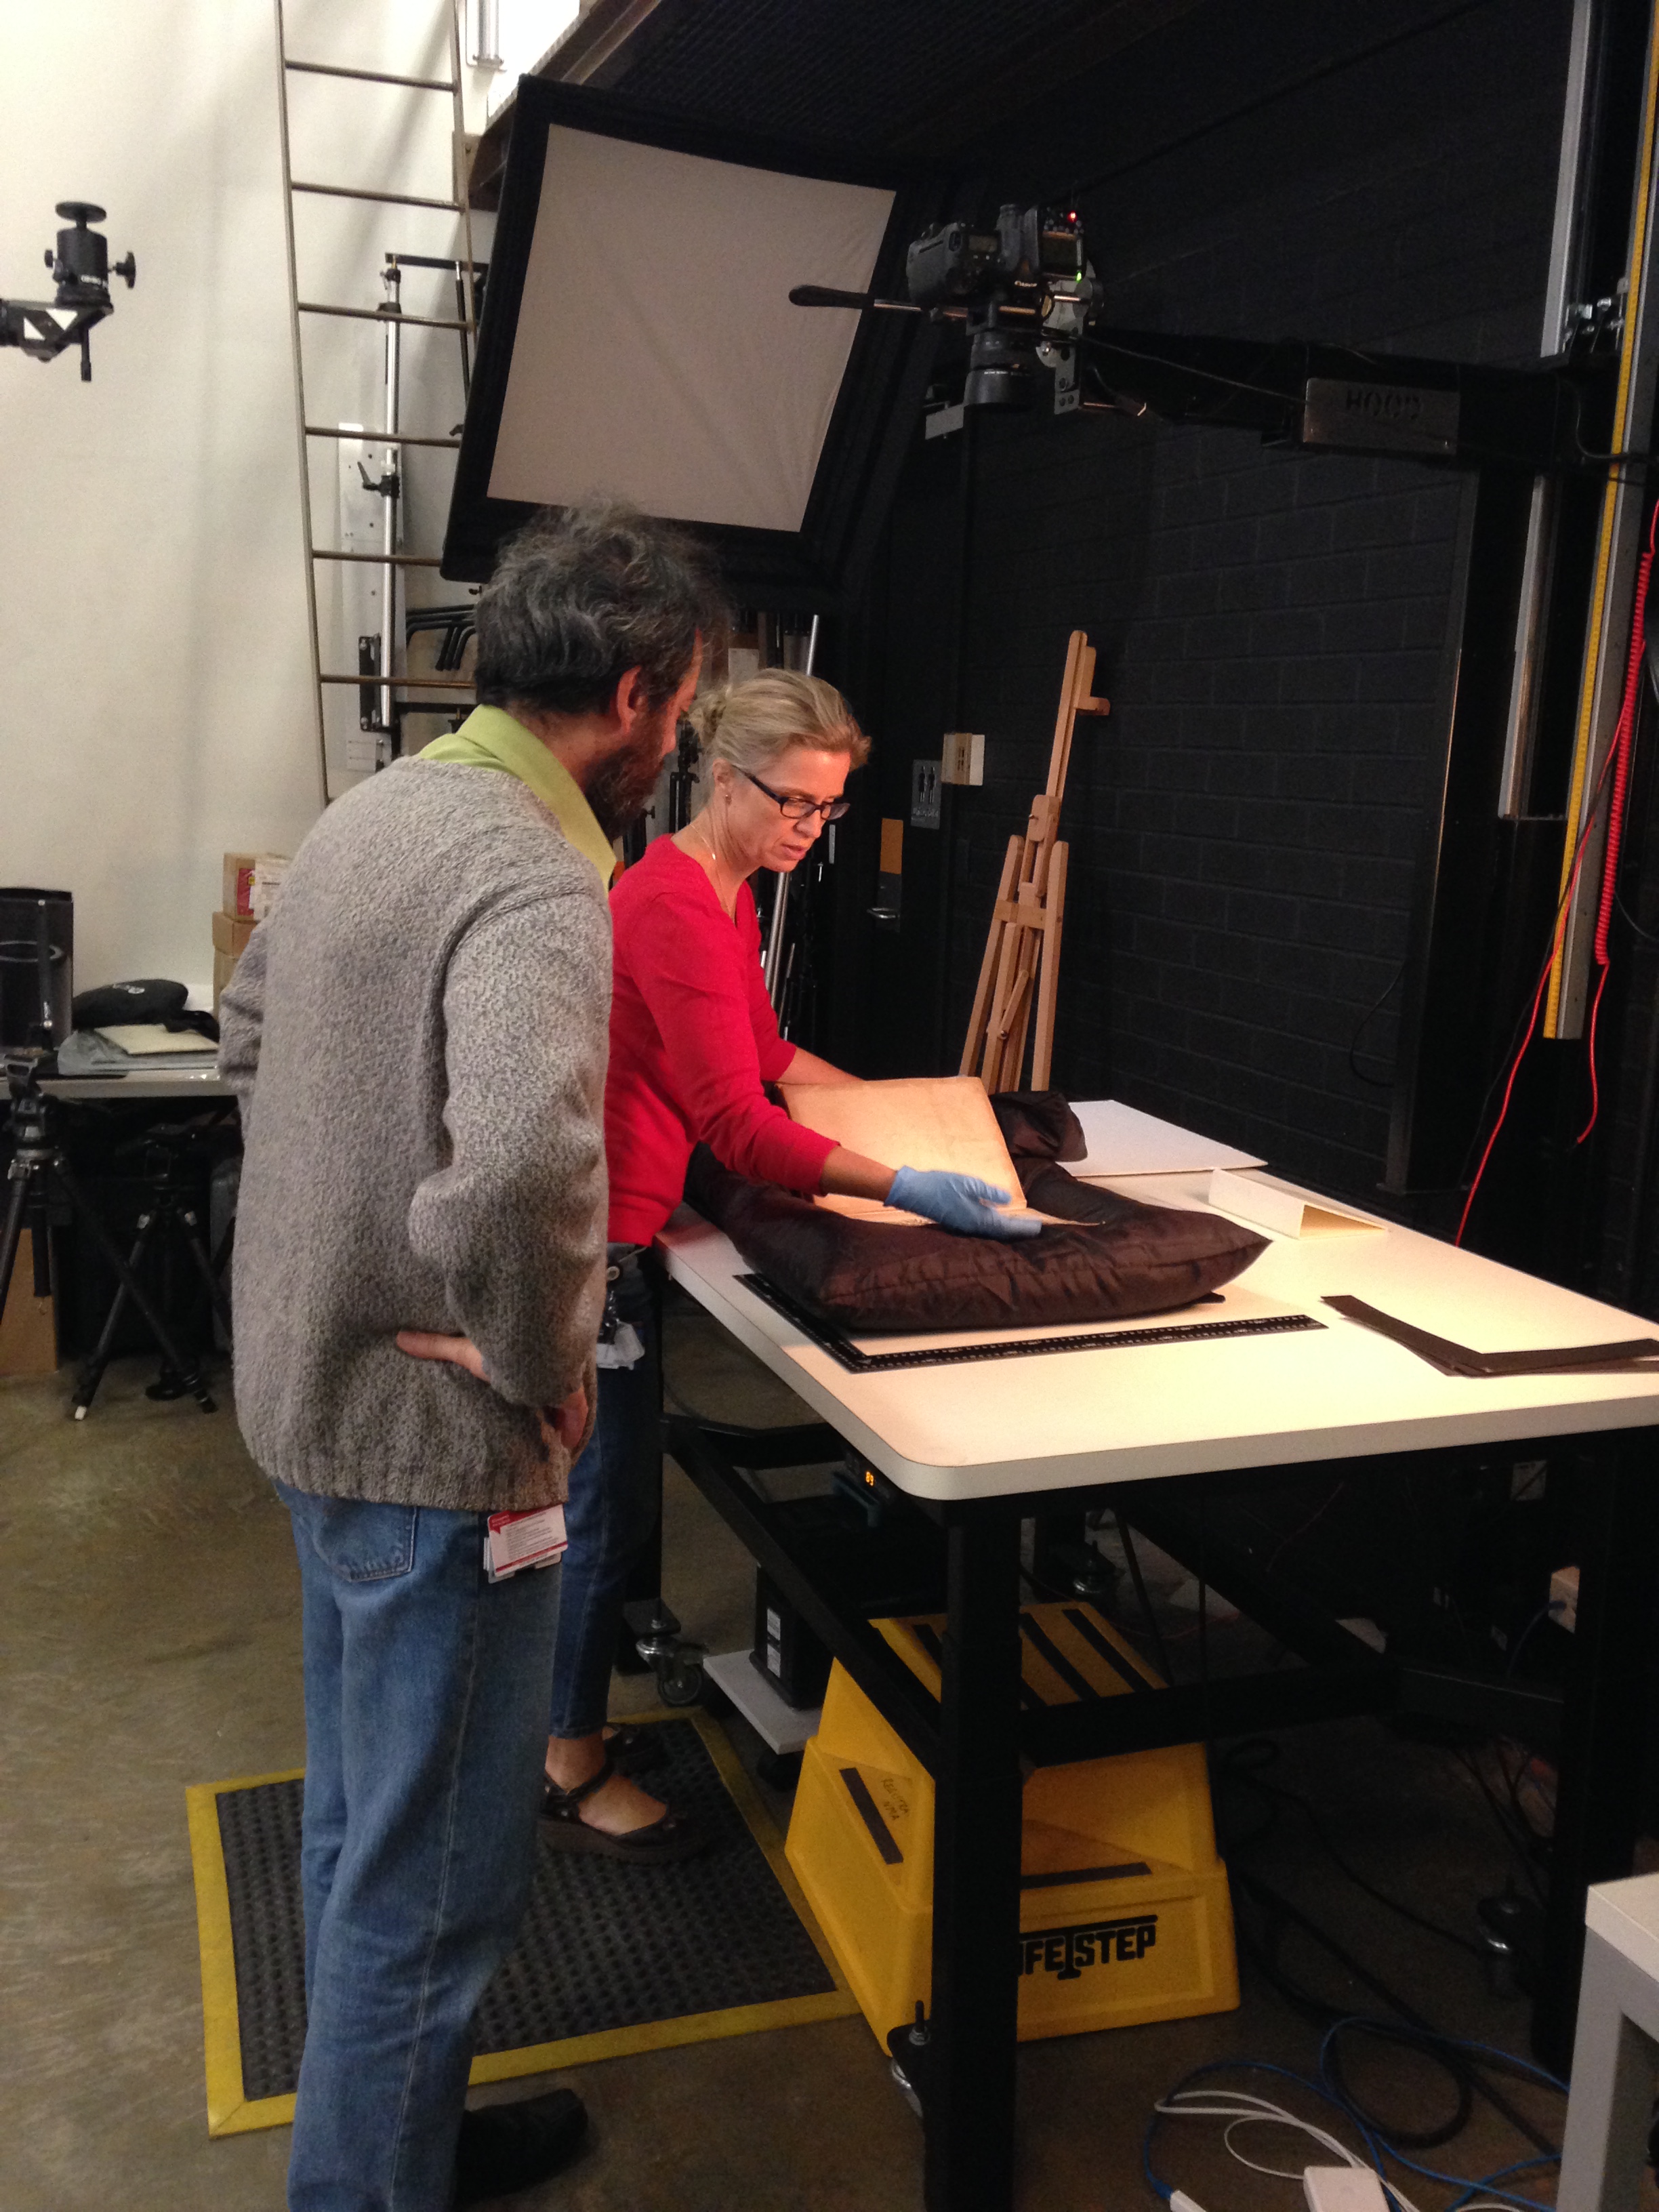 Senior conservator Tania Riviere and photographer George Serras discuss how to safely photograph the album. The object is cushioned on a 'pillow' to support the fragile spine as the pages are turned. Photograph by Kirsten Wehner.